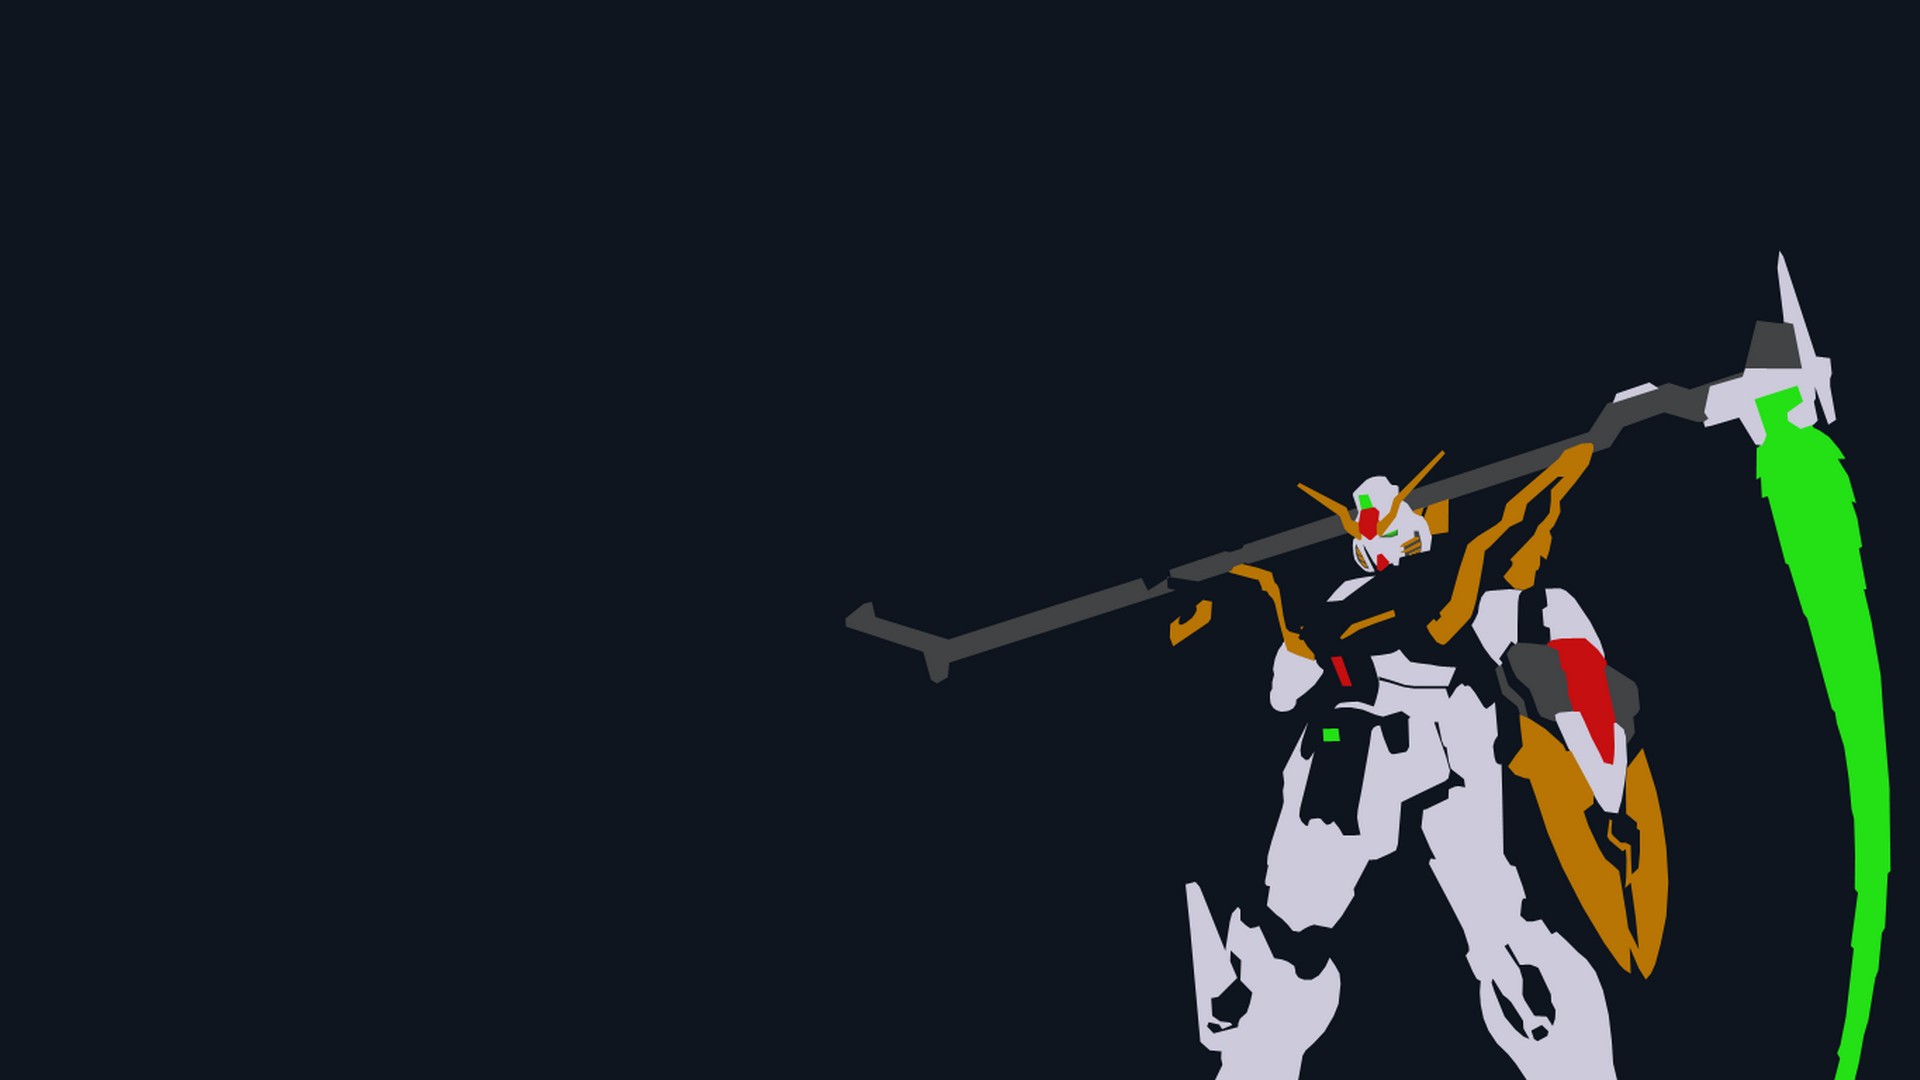 Wallpaper Gundam HD with high-resolution 1920x1080 pixel. You can use this wallpaper for your Desktop Computer Backgrounds, Mac Wallpapers, Android Lock screen or iPhone Screensavers and another smartphone device